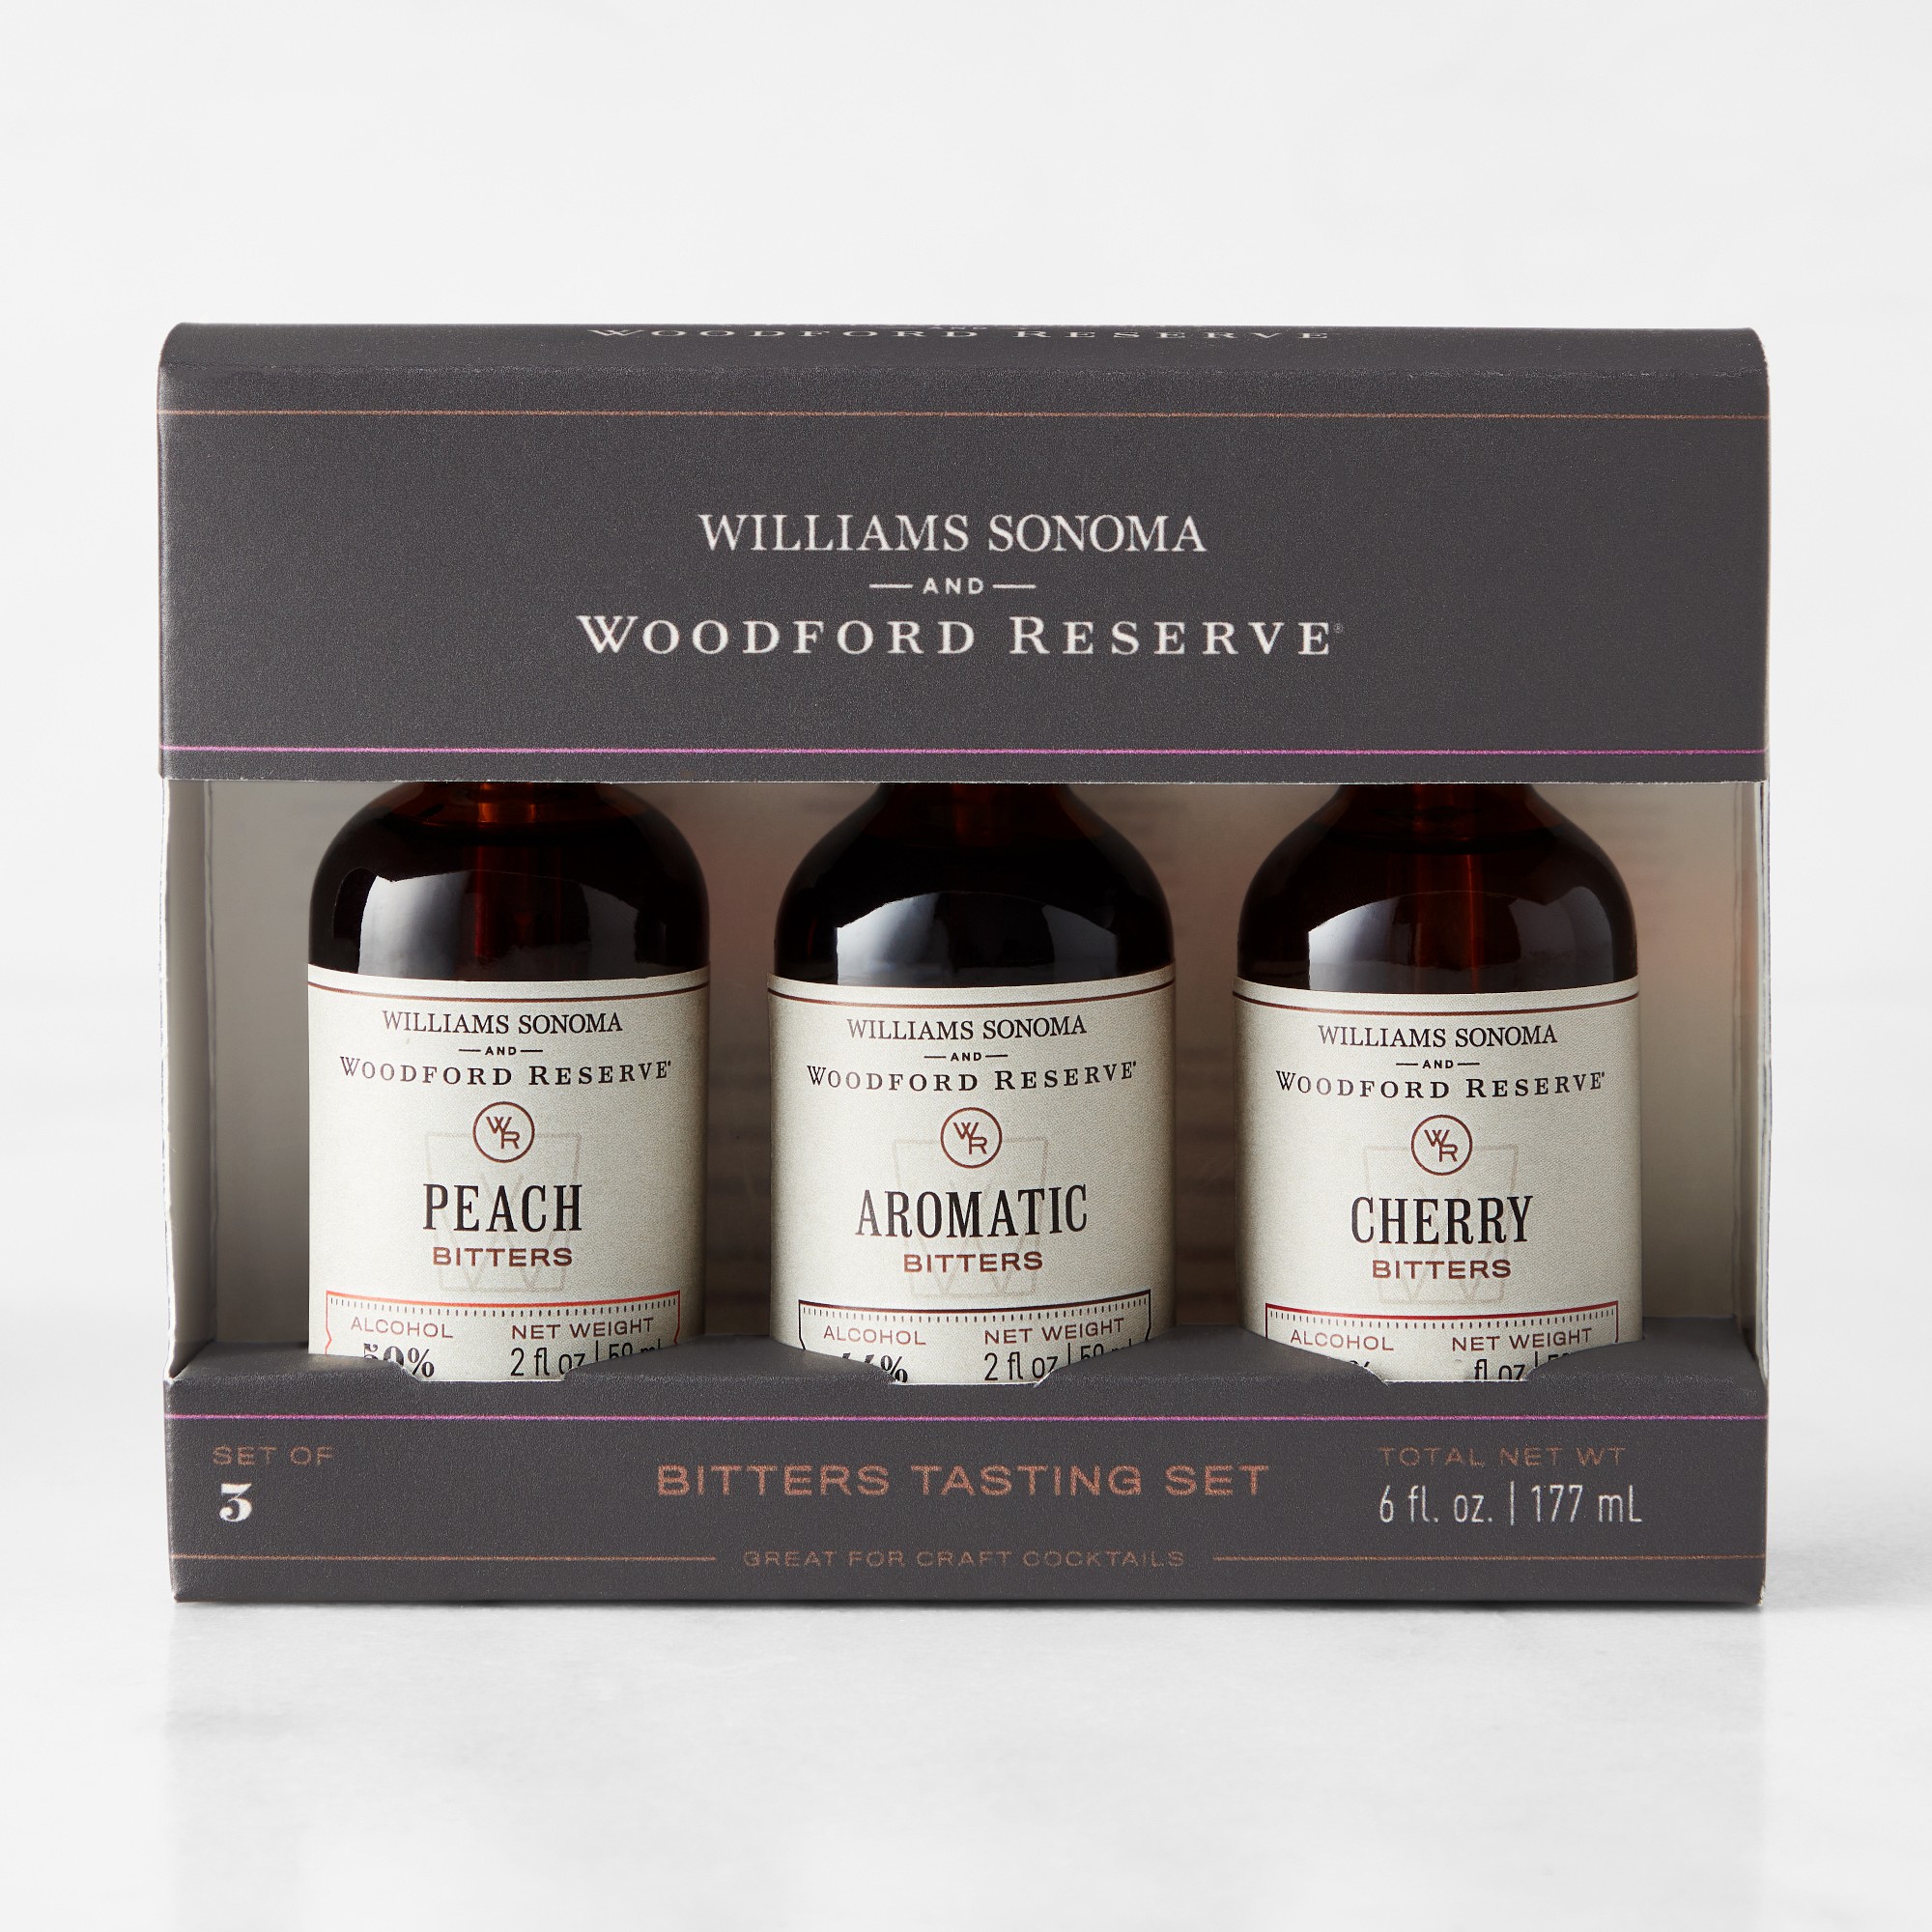 Williams Sonoma x Woodford Reserve Bitters Gift Set